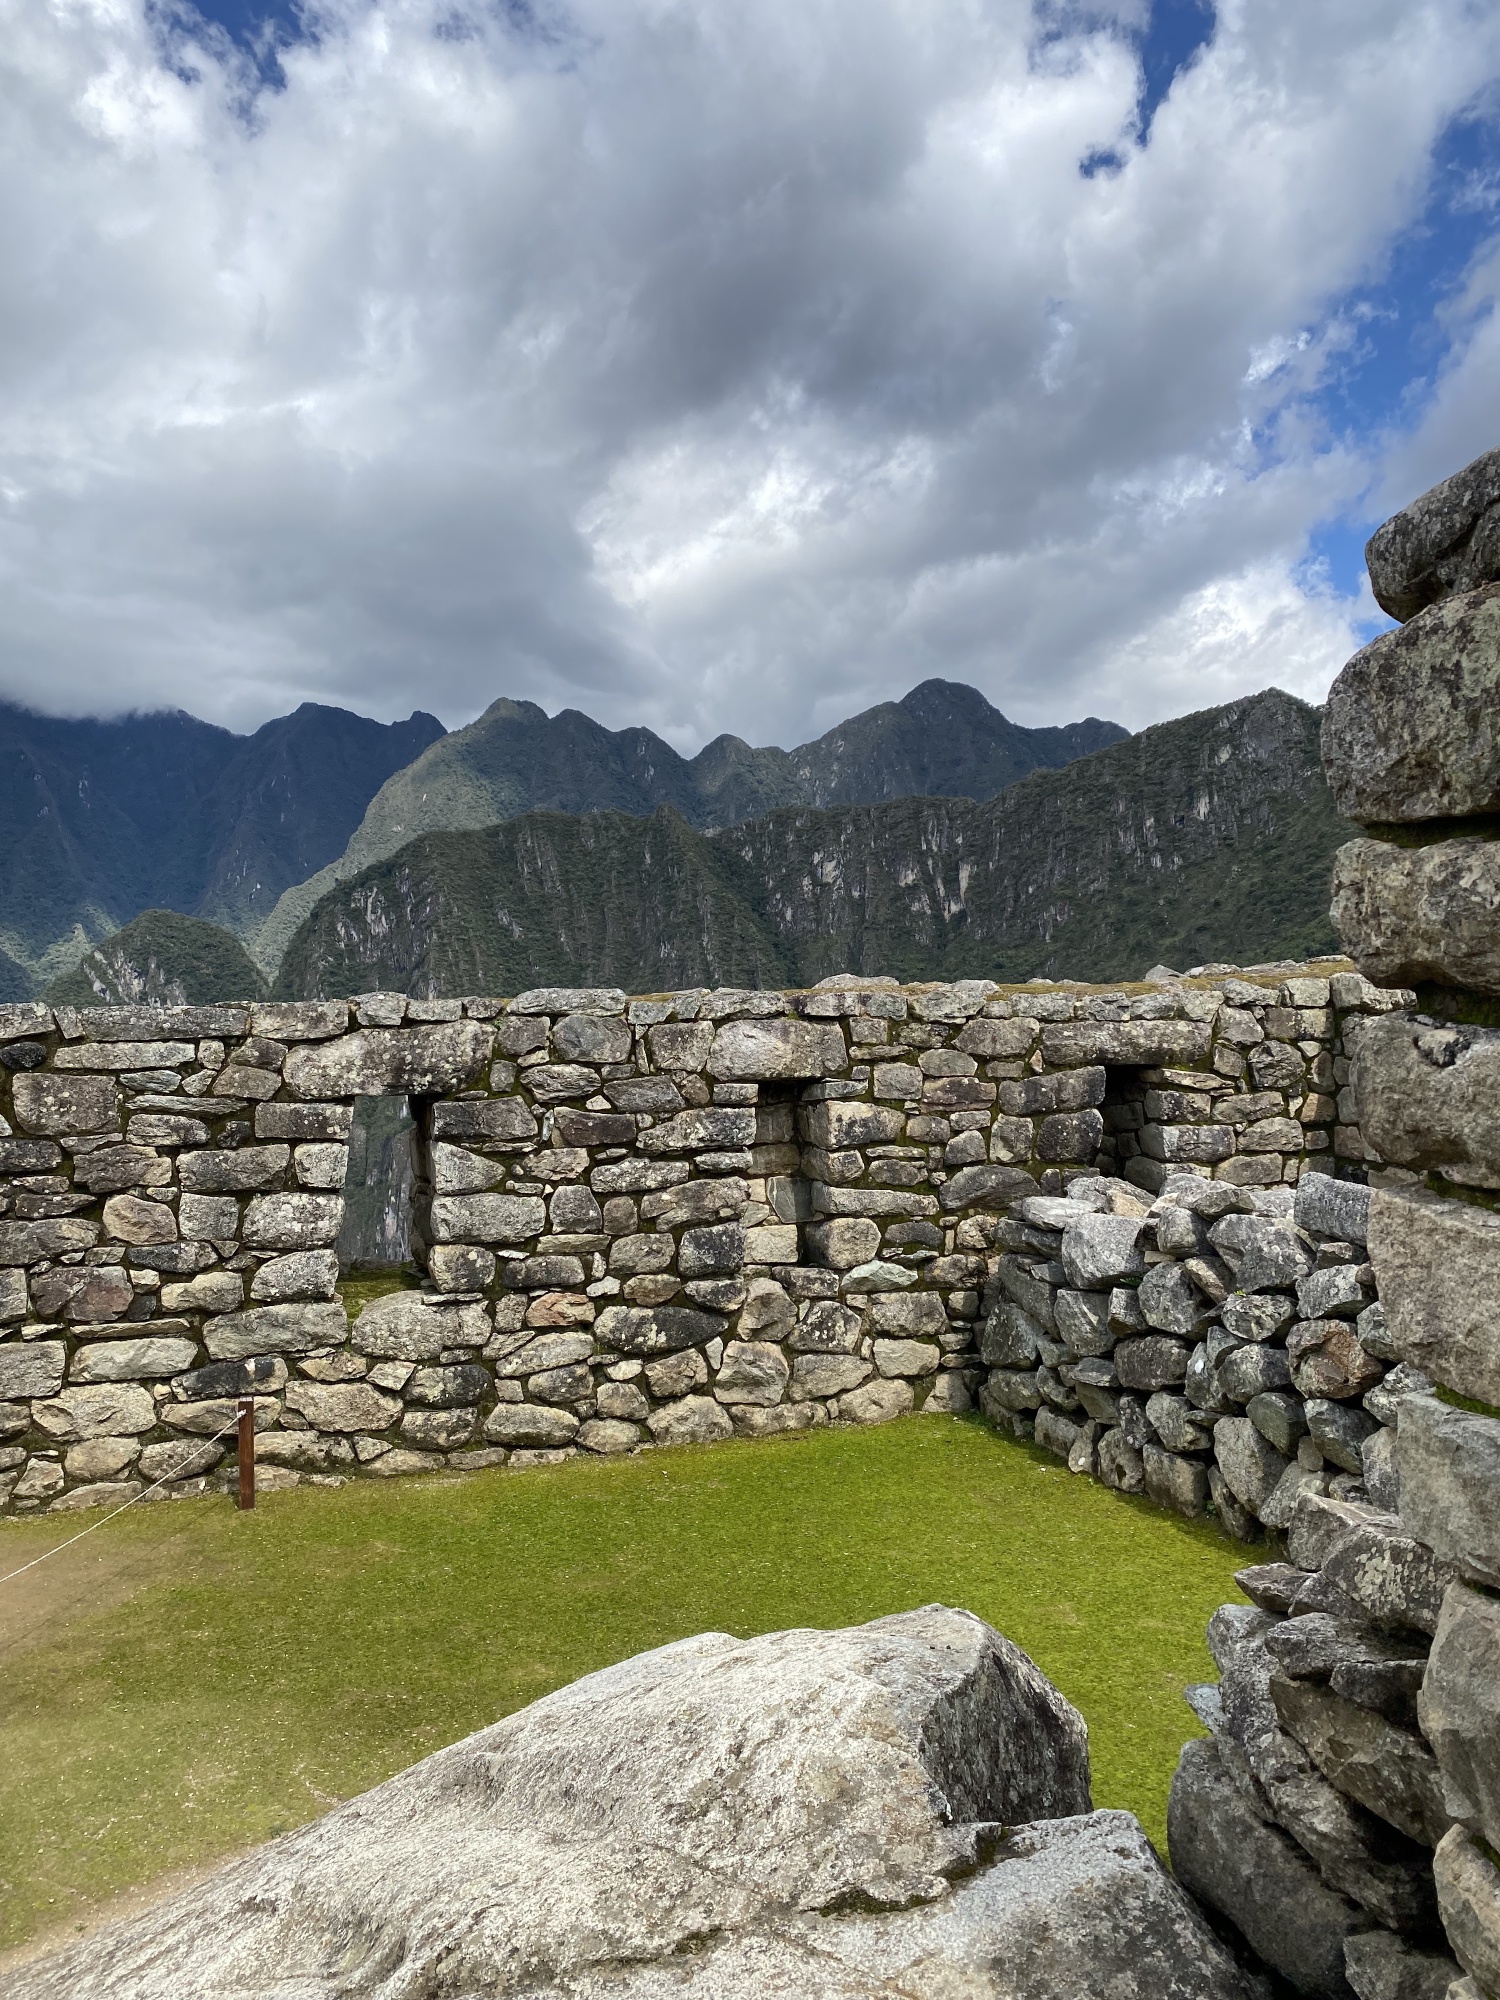 A typical house in Machu Picchu, this would have a roof on it